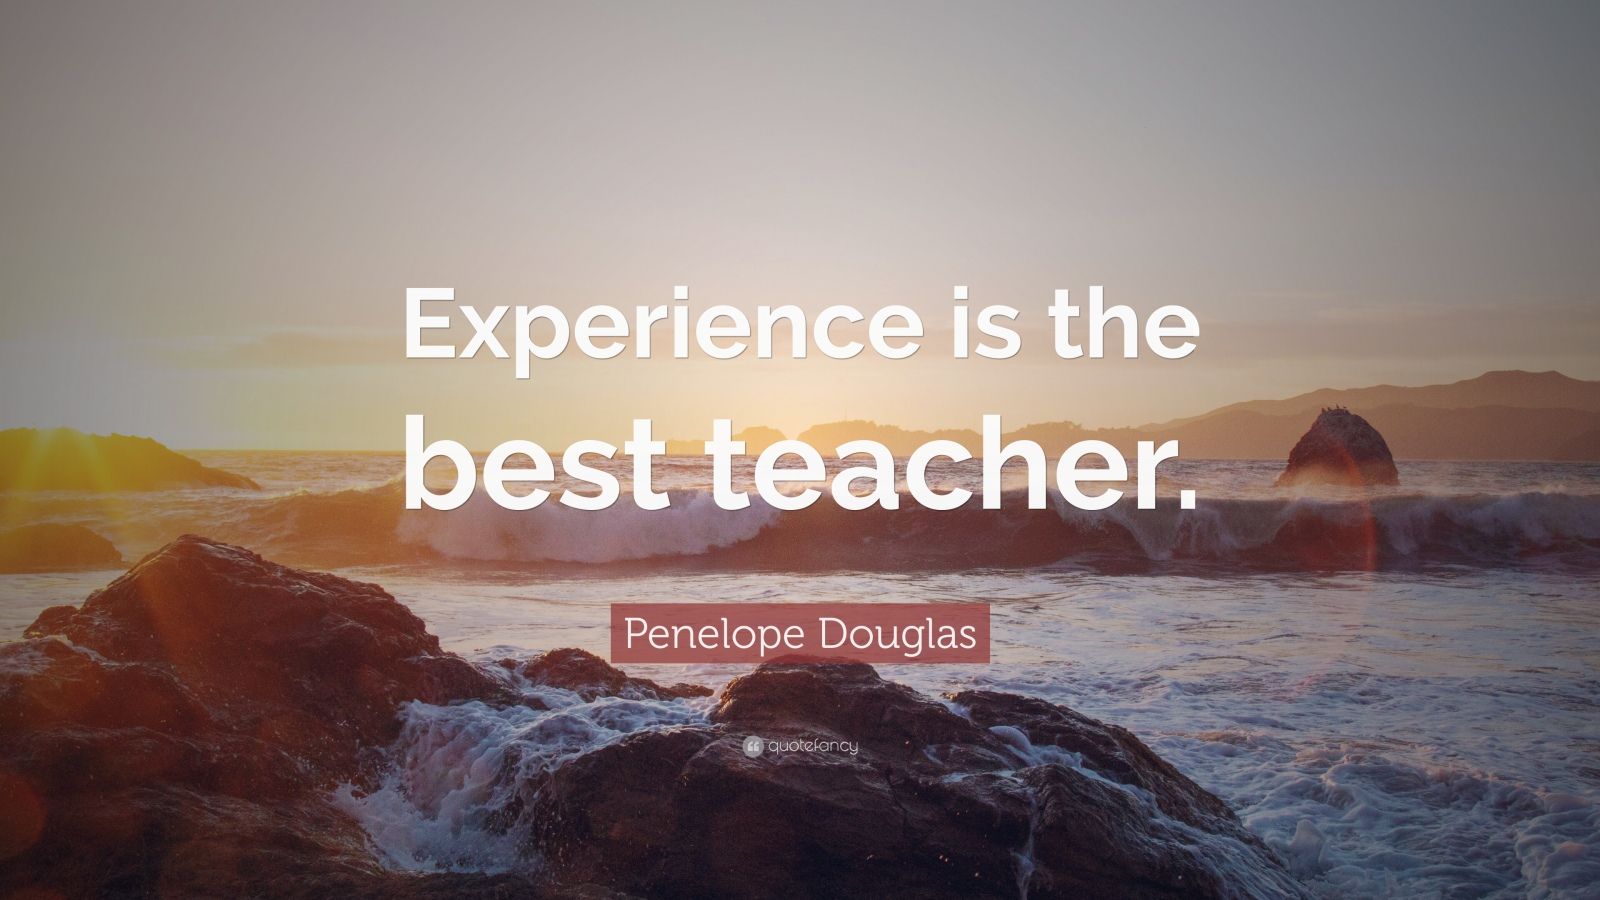 experience is the best teacher because essay